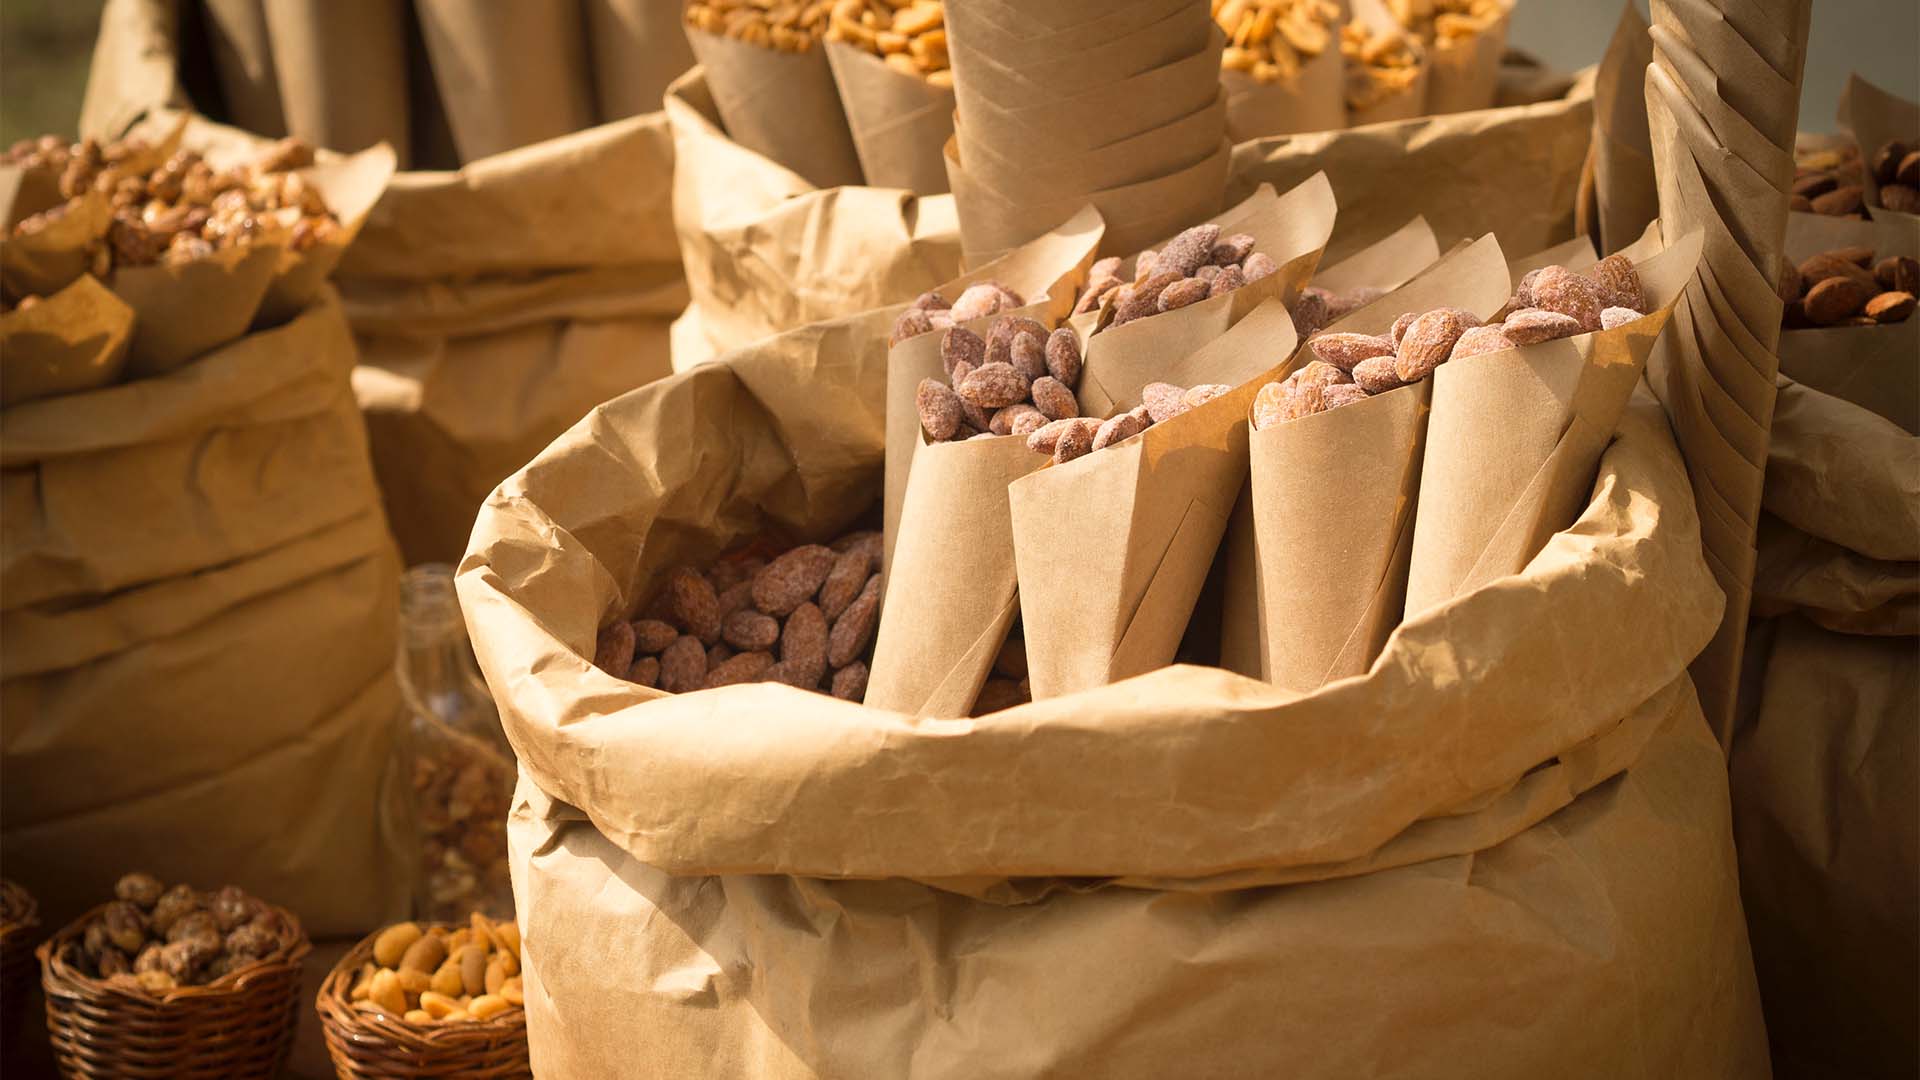 Peanuts collections in brown bags ready to be served